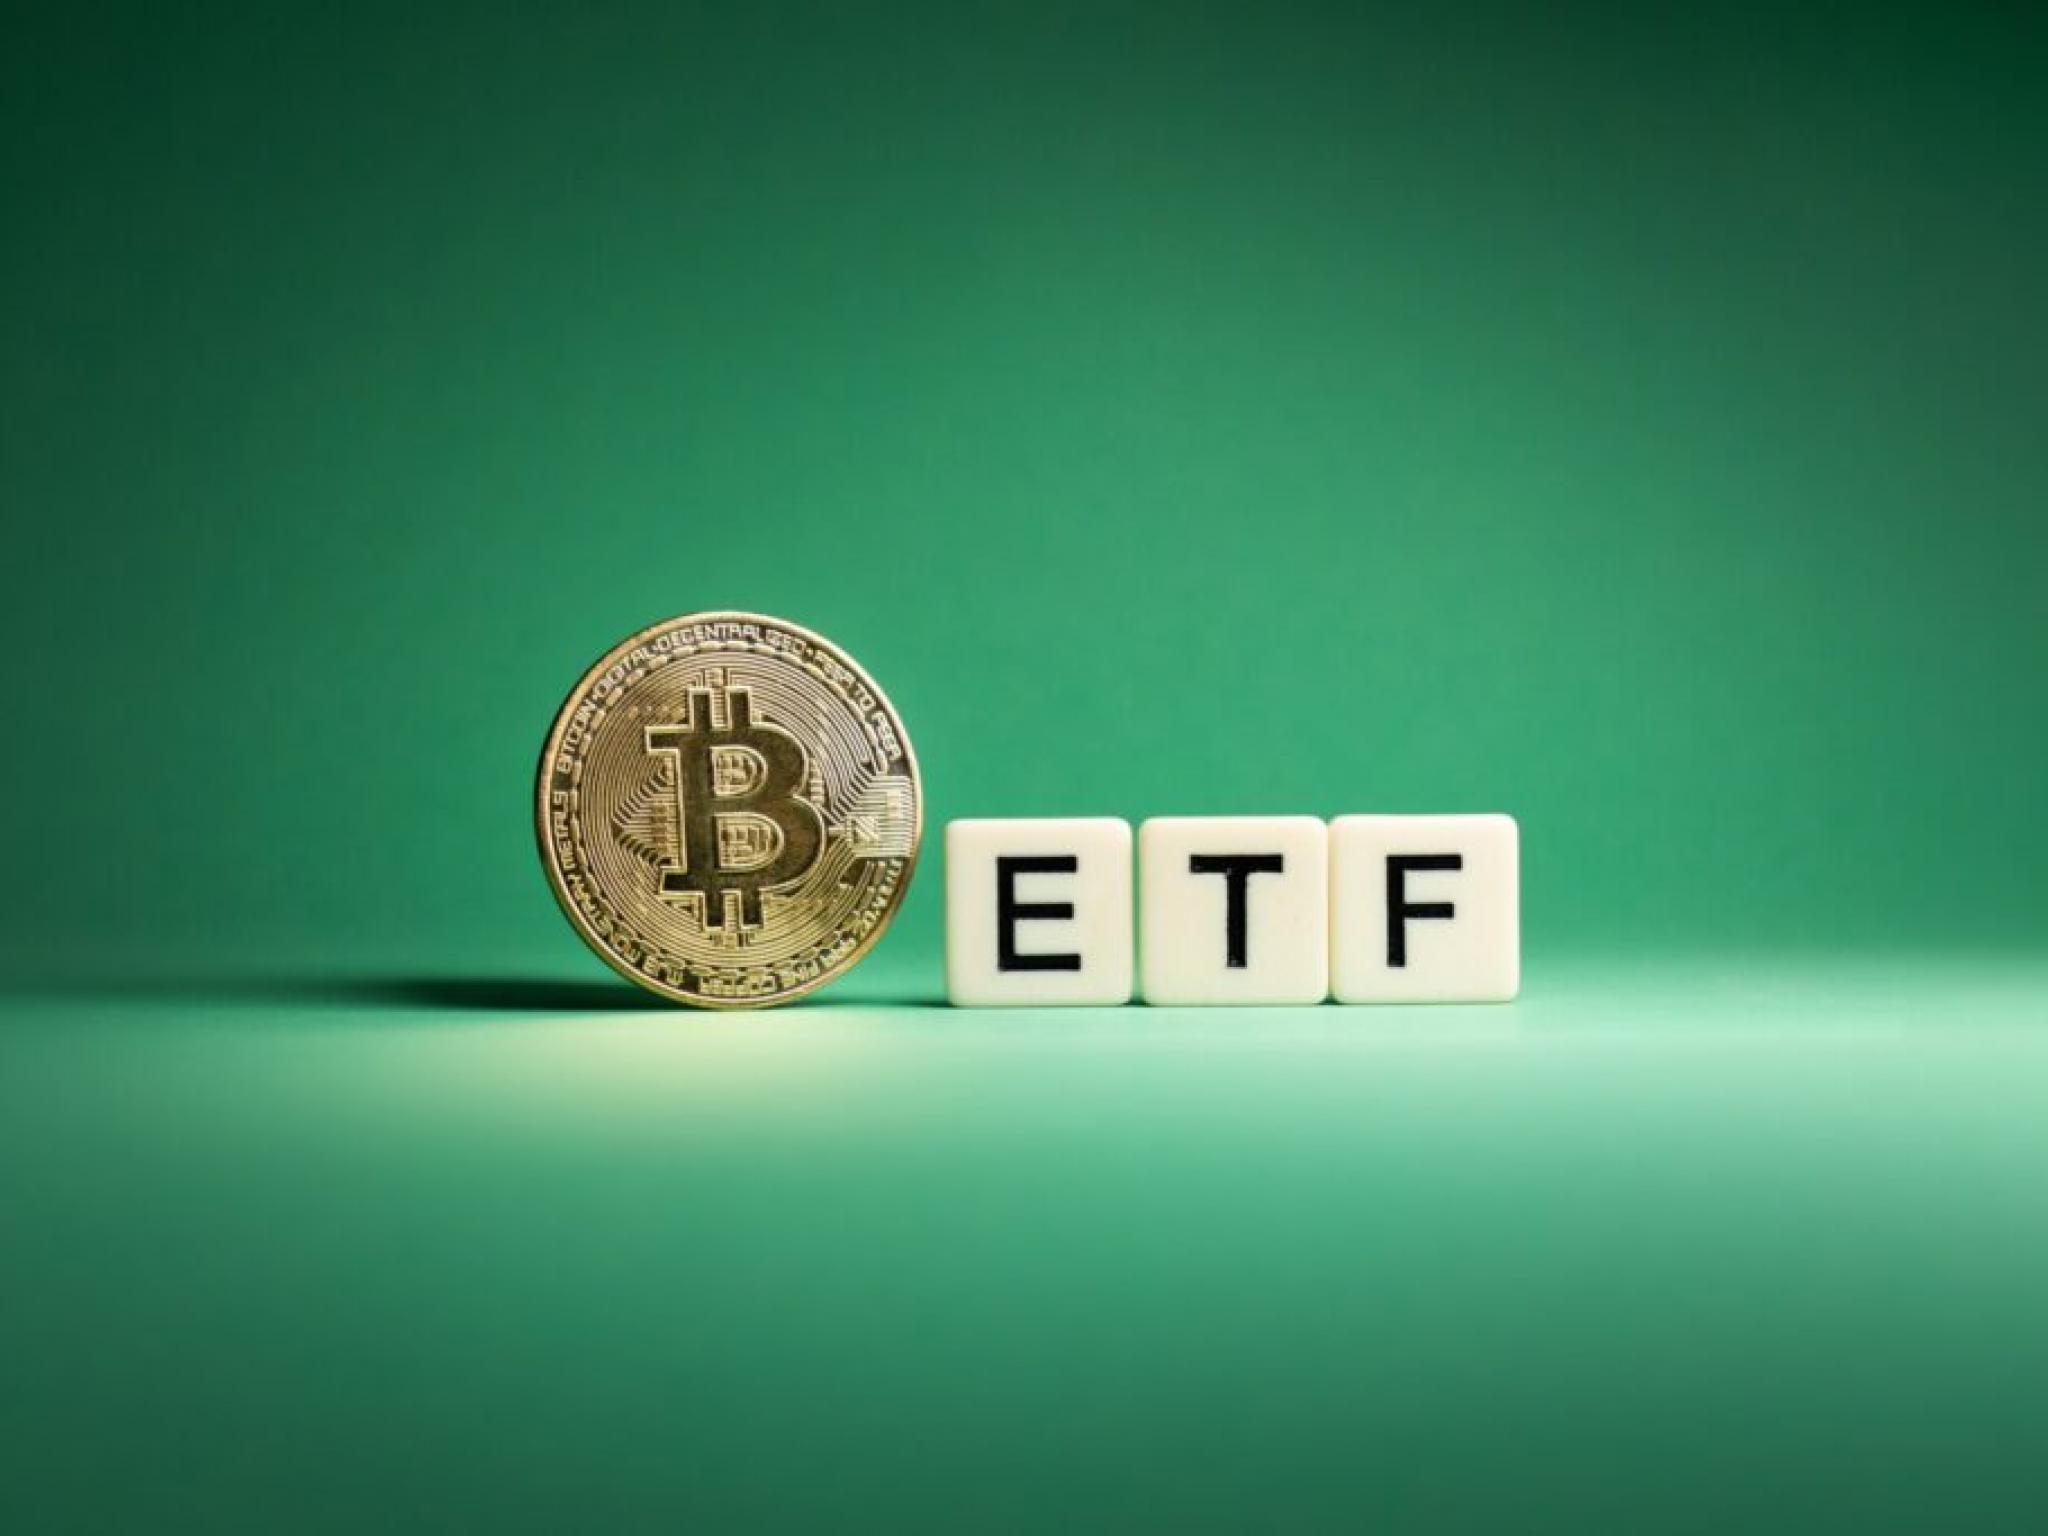  bitcoin-etf-launch-shatters-records-attracts-over-4-billion-biggest-day-one-splash-in-etf-history-analyst-says 